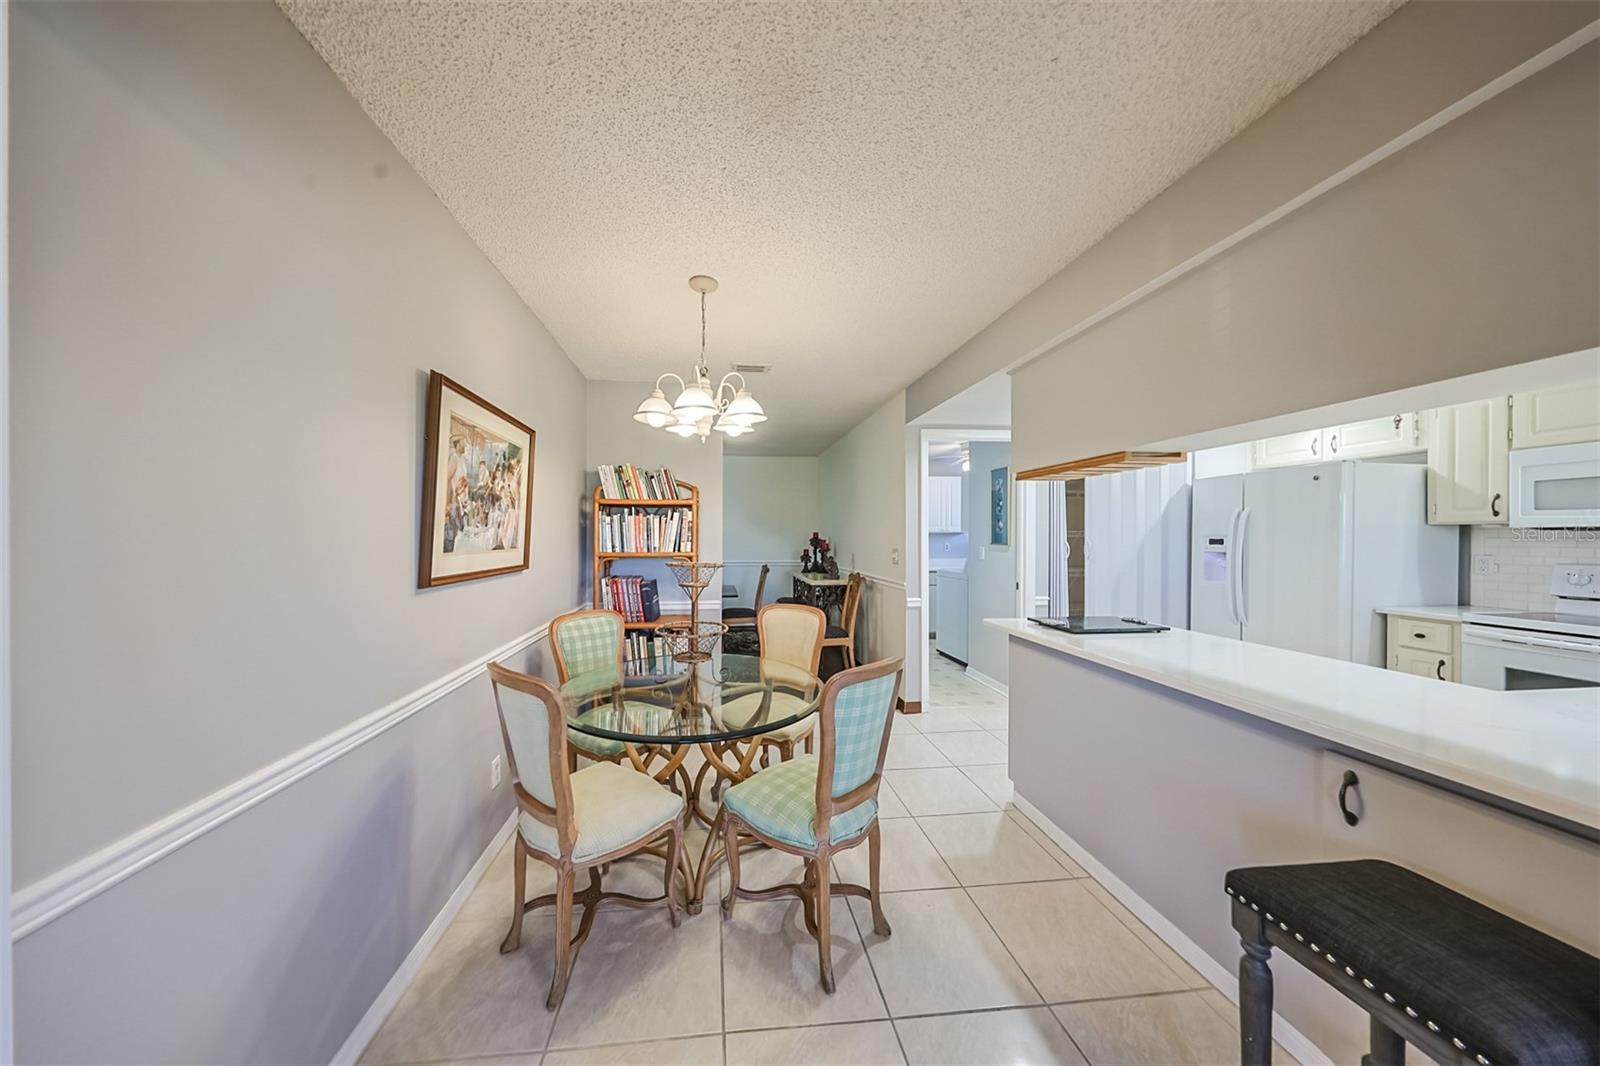 Kitchen includes newer appliances, lots of lovely Corian countertop space, a pantry along a full wall and a large pass-through window so that you can see/talk to anyone in the Florida room or enjoy the vast green space and Florida sunshine outside.